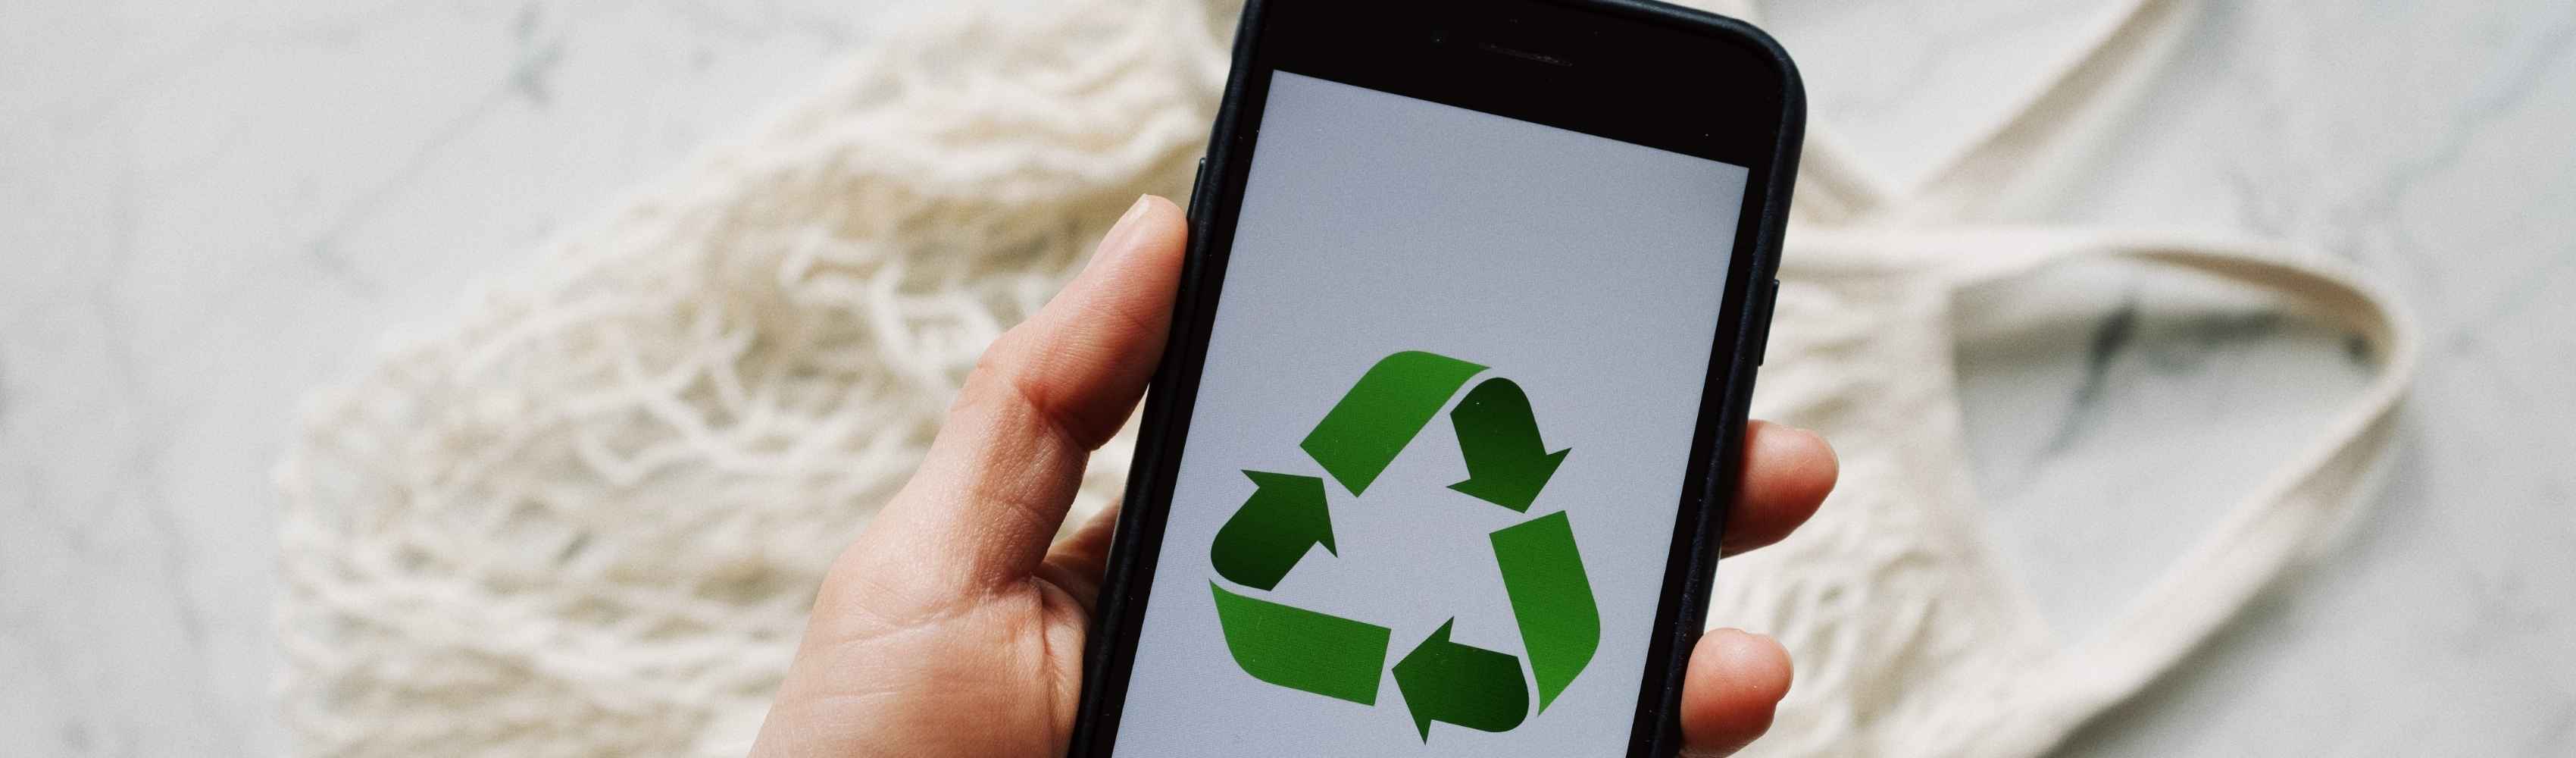 Recycle symbol on iPhone